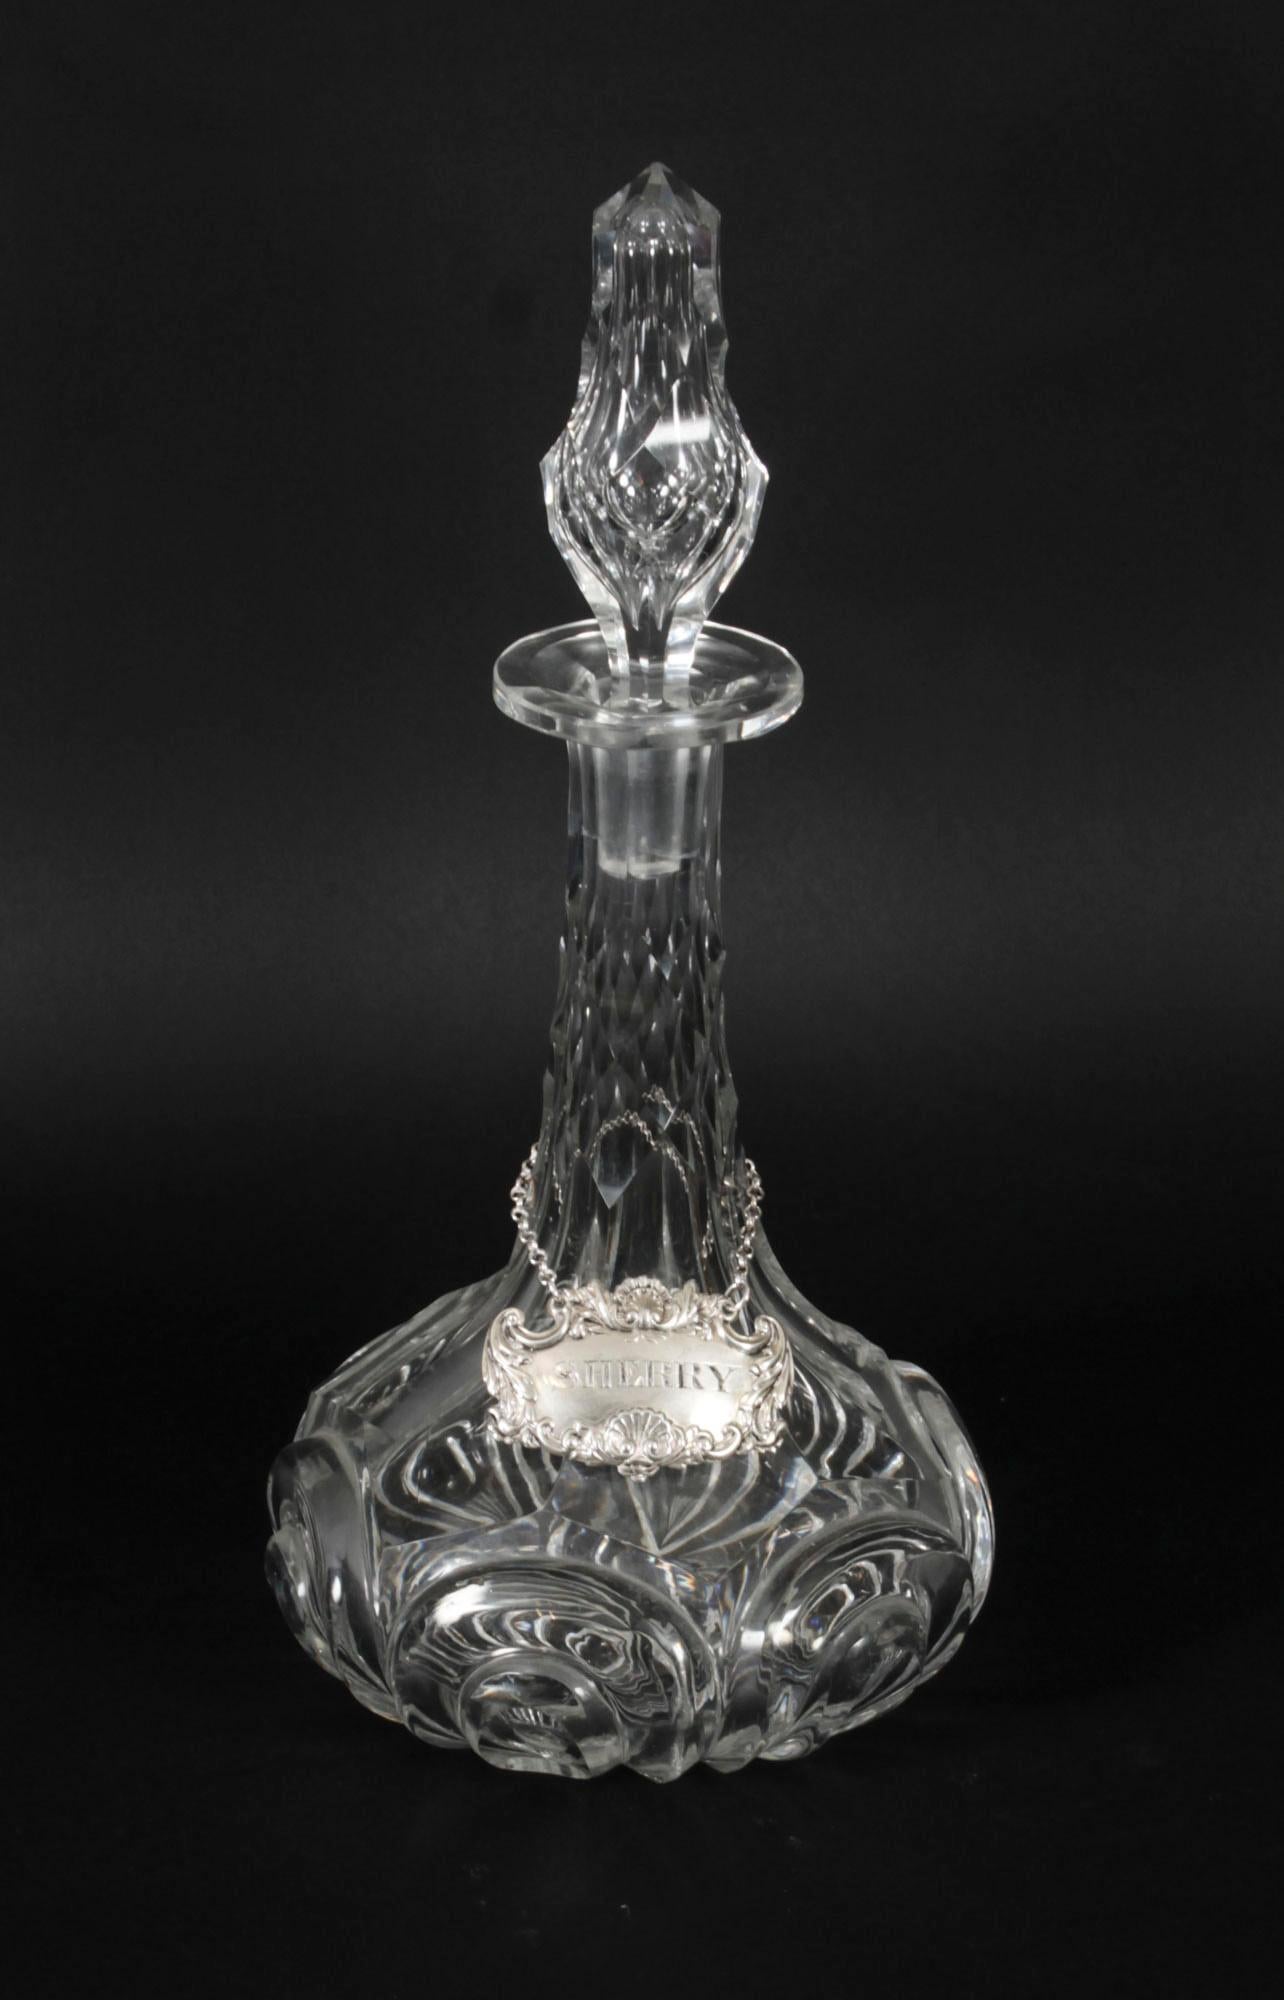 Antique Cut Glass Ship's Sherry Decanter with Silver Label Circa 1920 For Sale 2